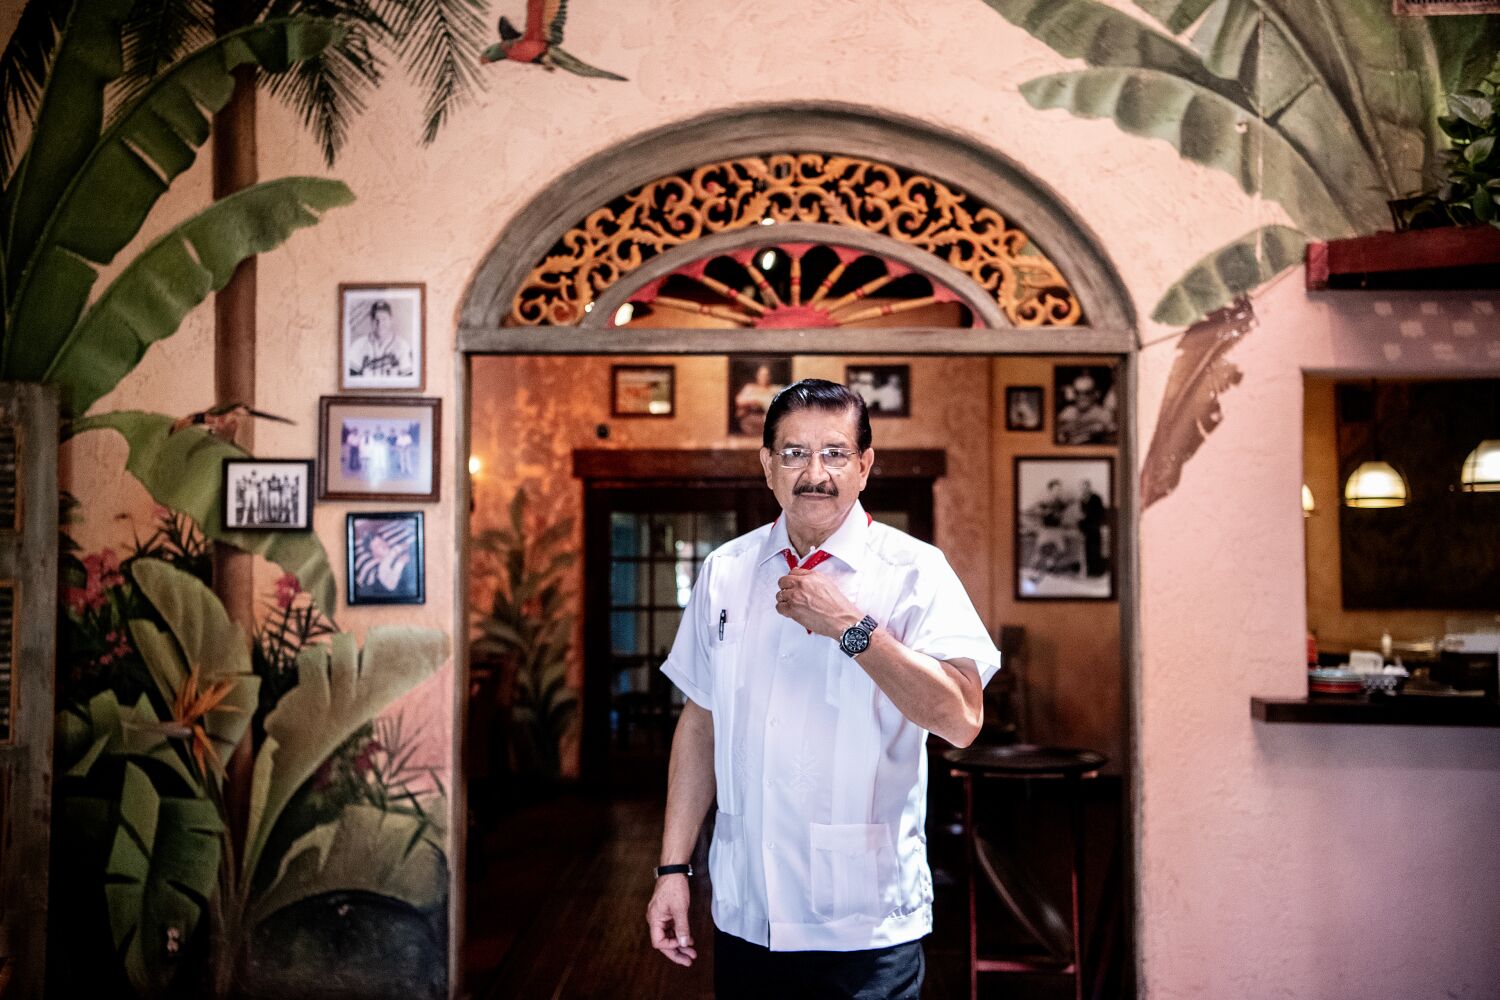 Over 200 years of service: The work lives of 5 El Cholo employees